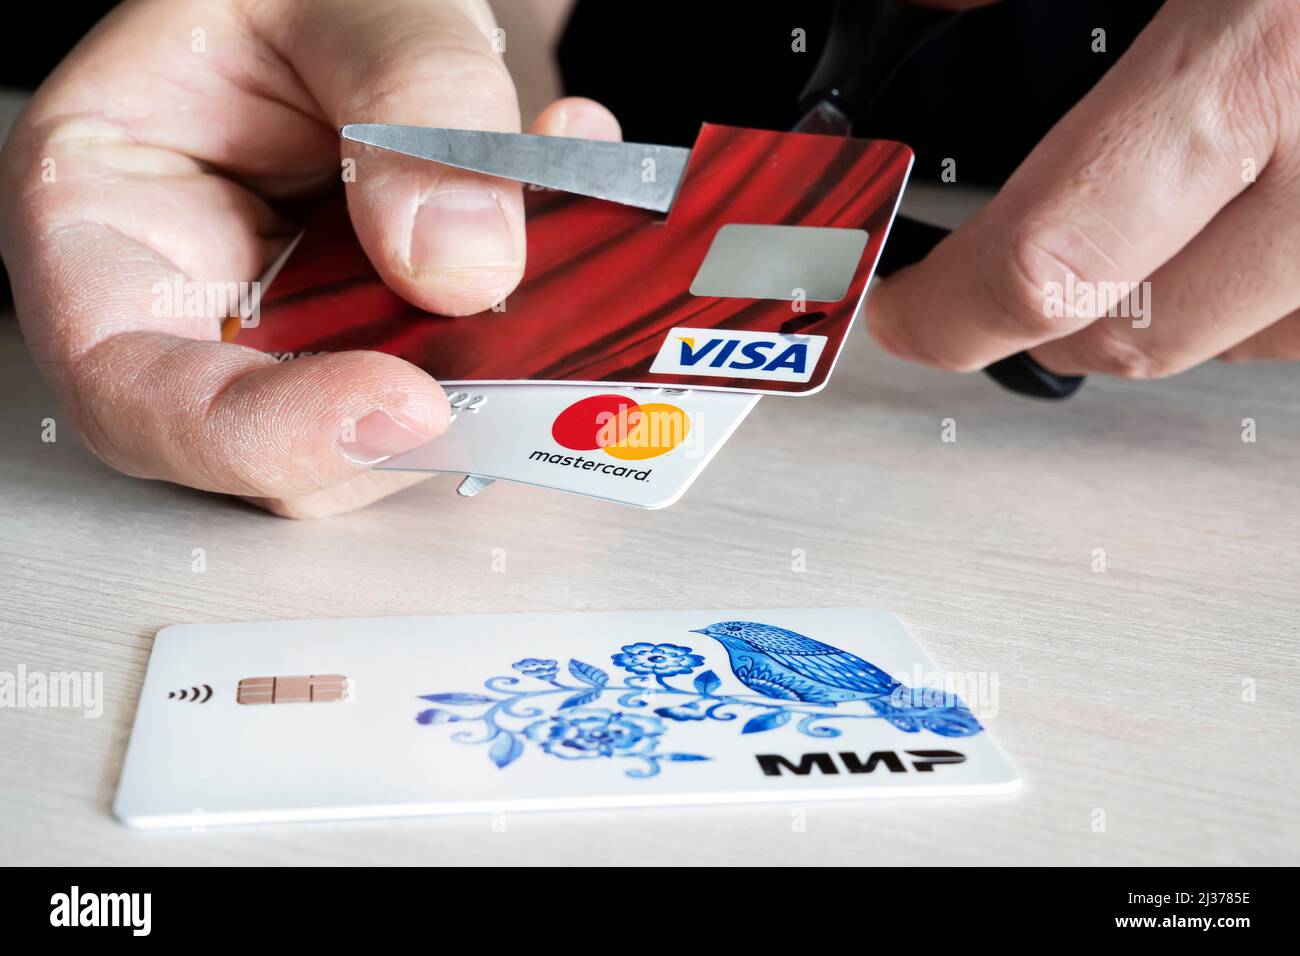 April 2, 2022. Barnaul. Russia: a man cuts bank credit cards of the type and mastercard with scissors. Destruction of plastic cards after the expirati Stock Photo